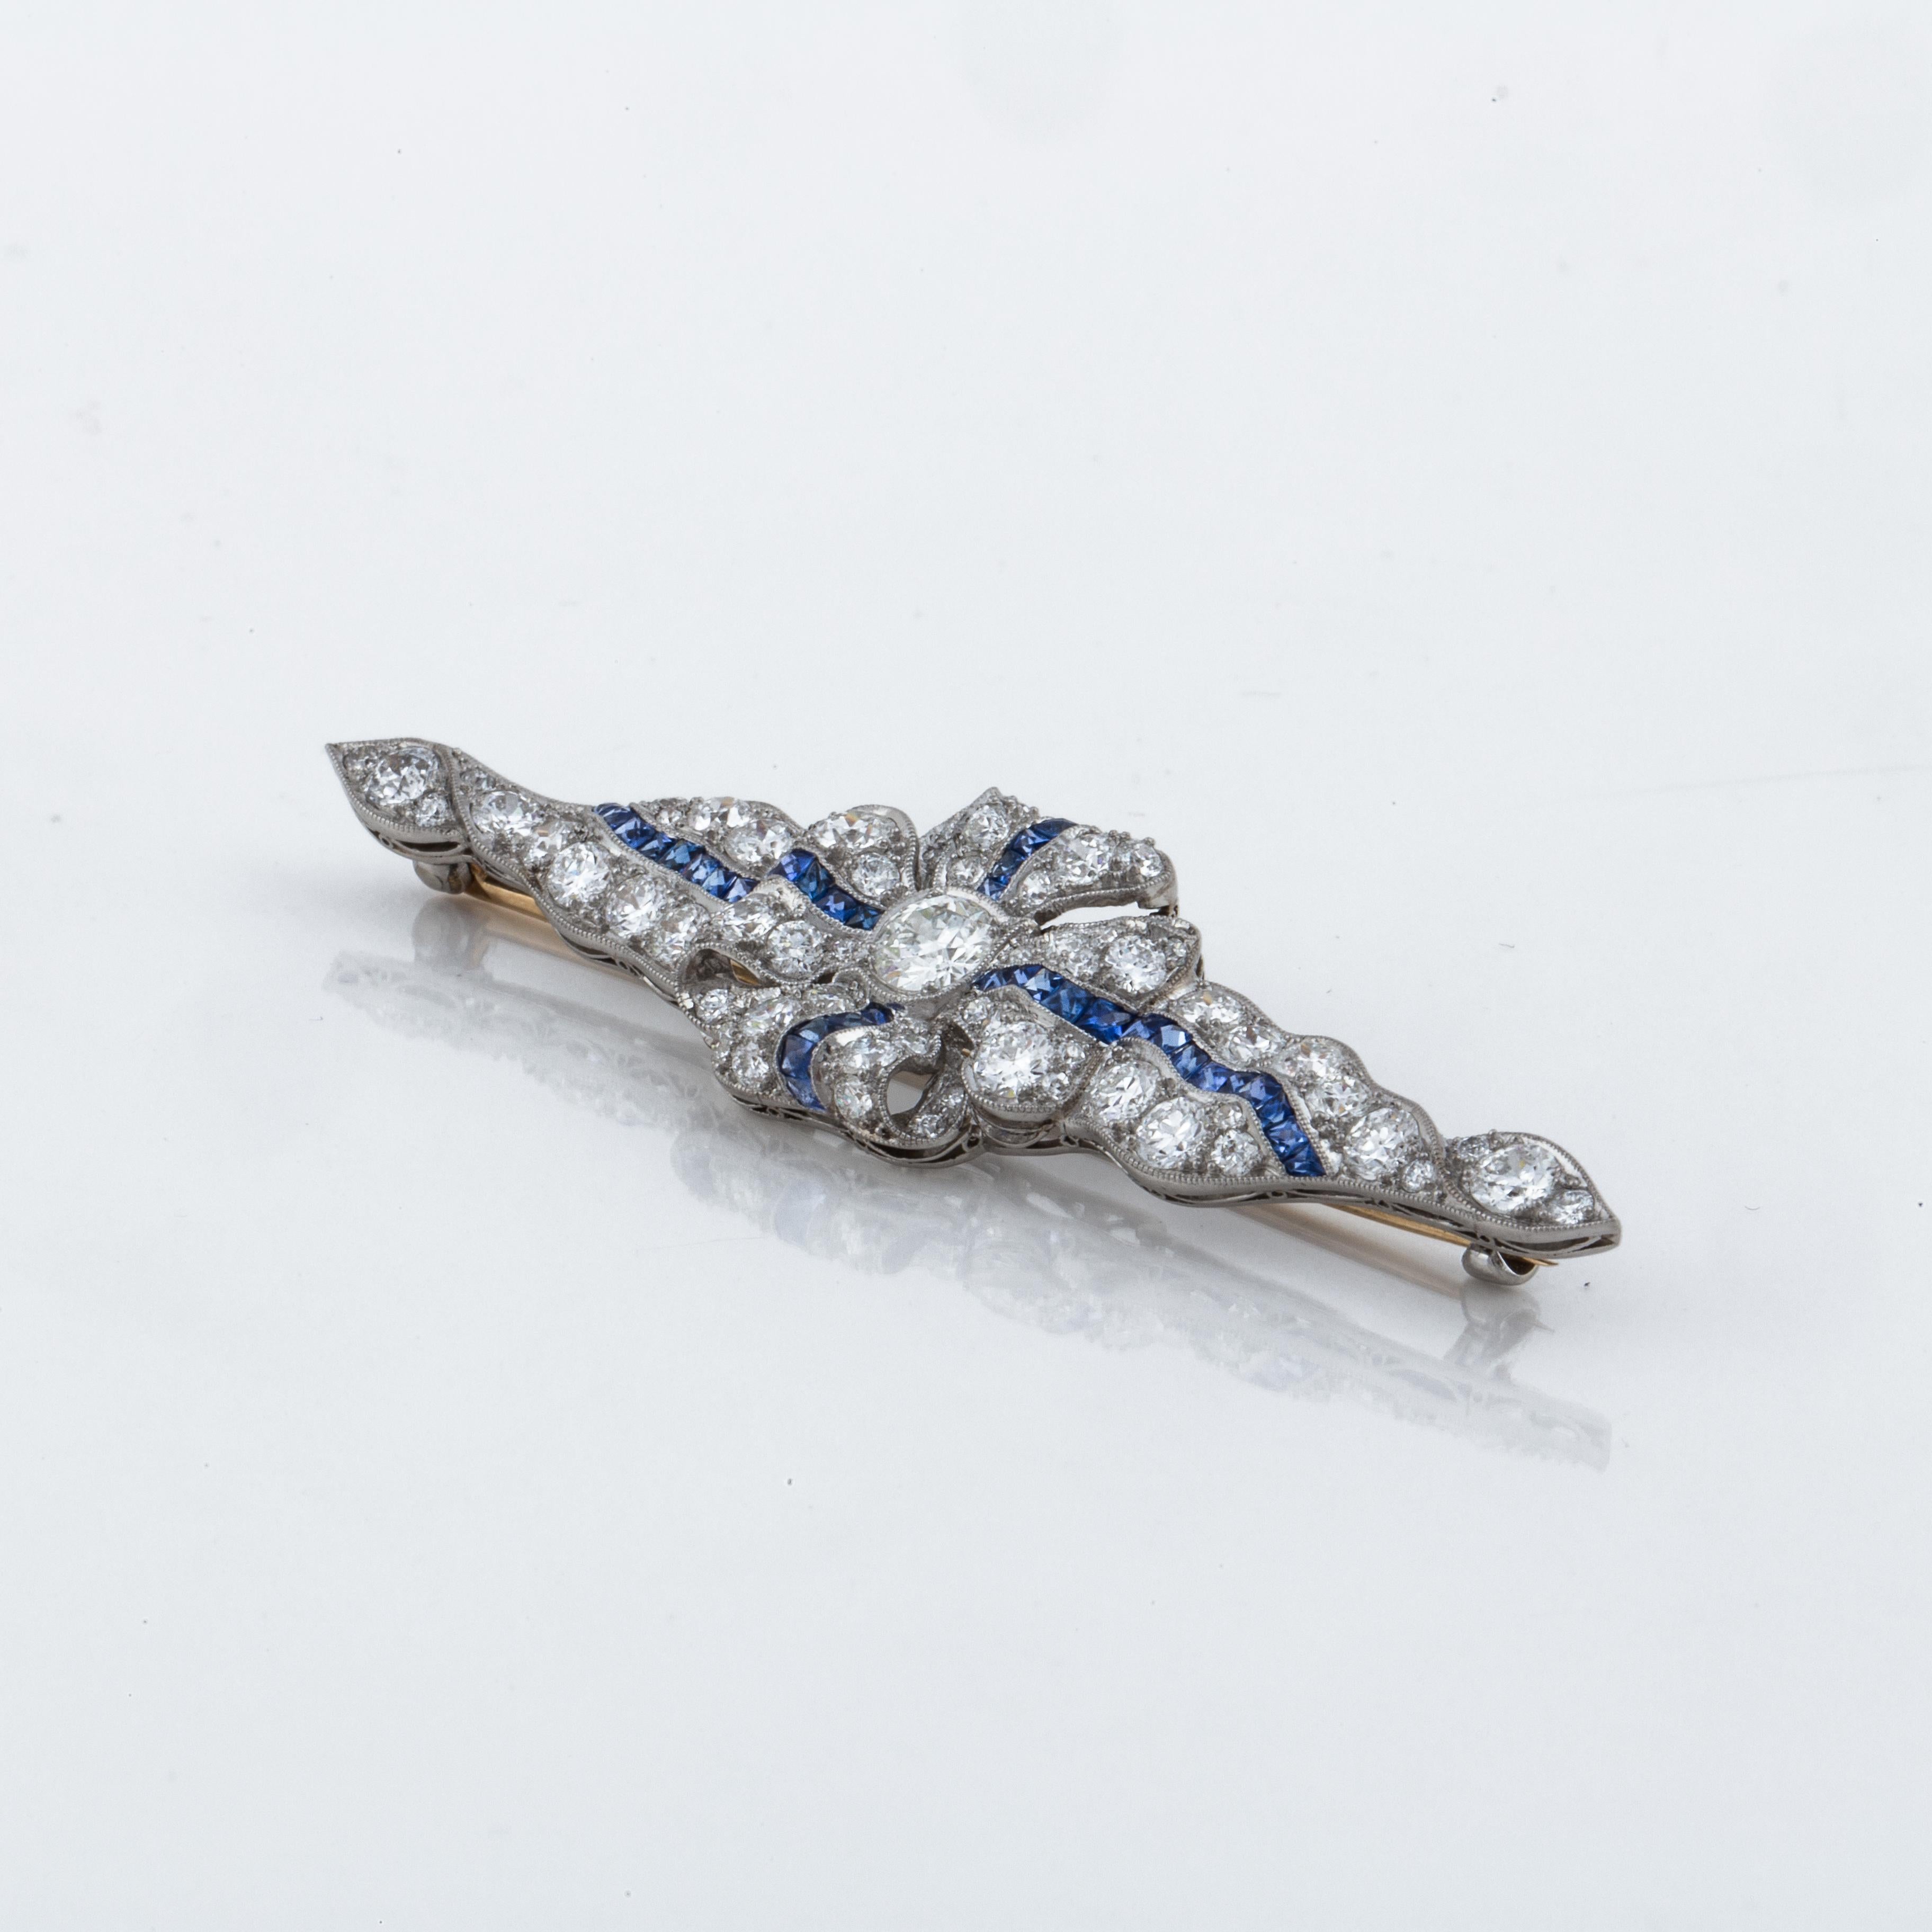 Platinum pin with an 18K yellow gold stem in a ribbon motif.  There are 38 square-cut sapphires and 65 round diamonds totaling 5 carats; H-I color and VS1-VS2 clarity.  Pin measures 2 5/8 inches long and 3/4 inches wide.  Closure is a 